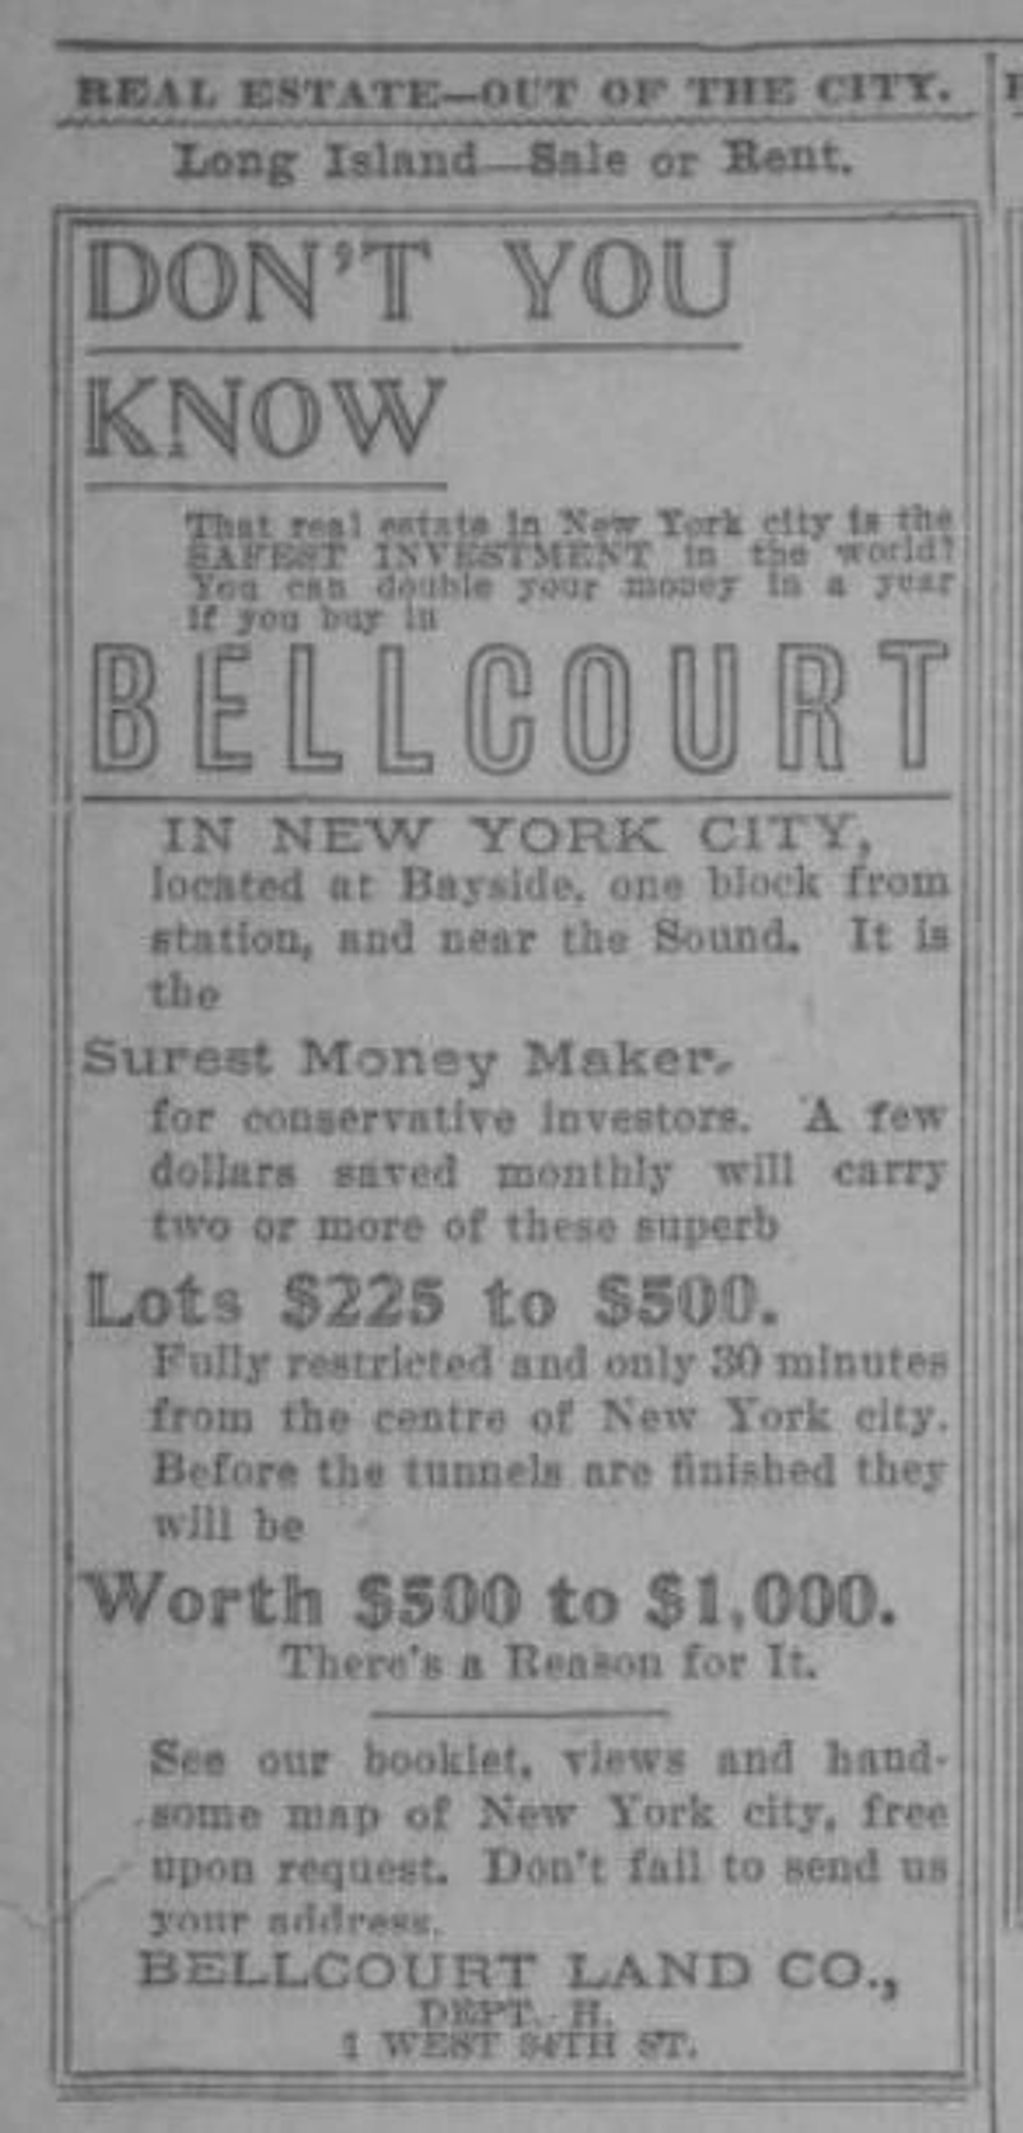 Long Island Real Estate 
March 7, 1906, NY Herald 